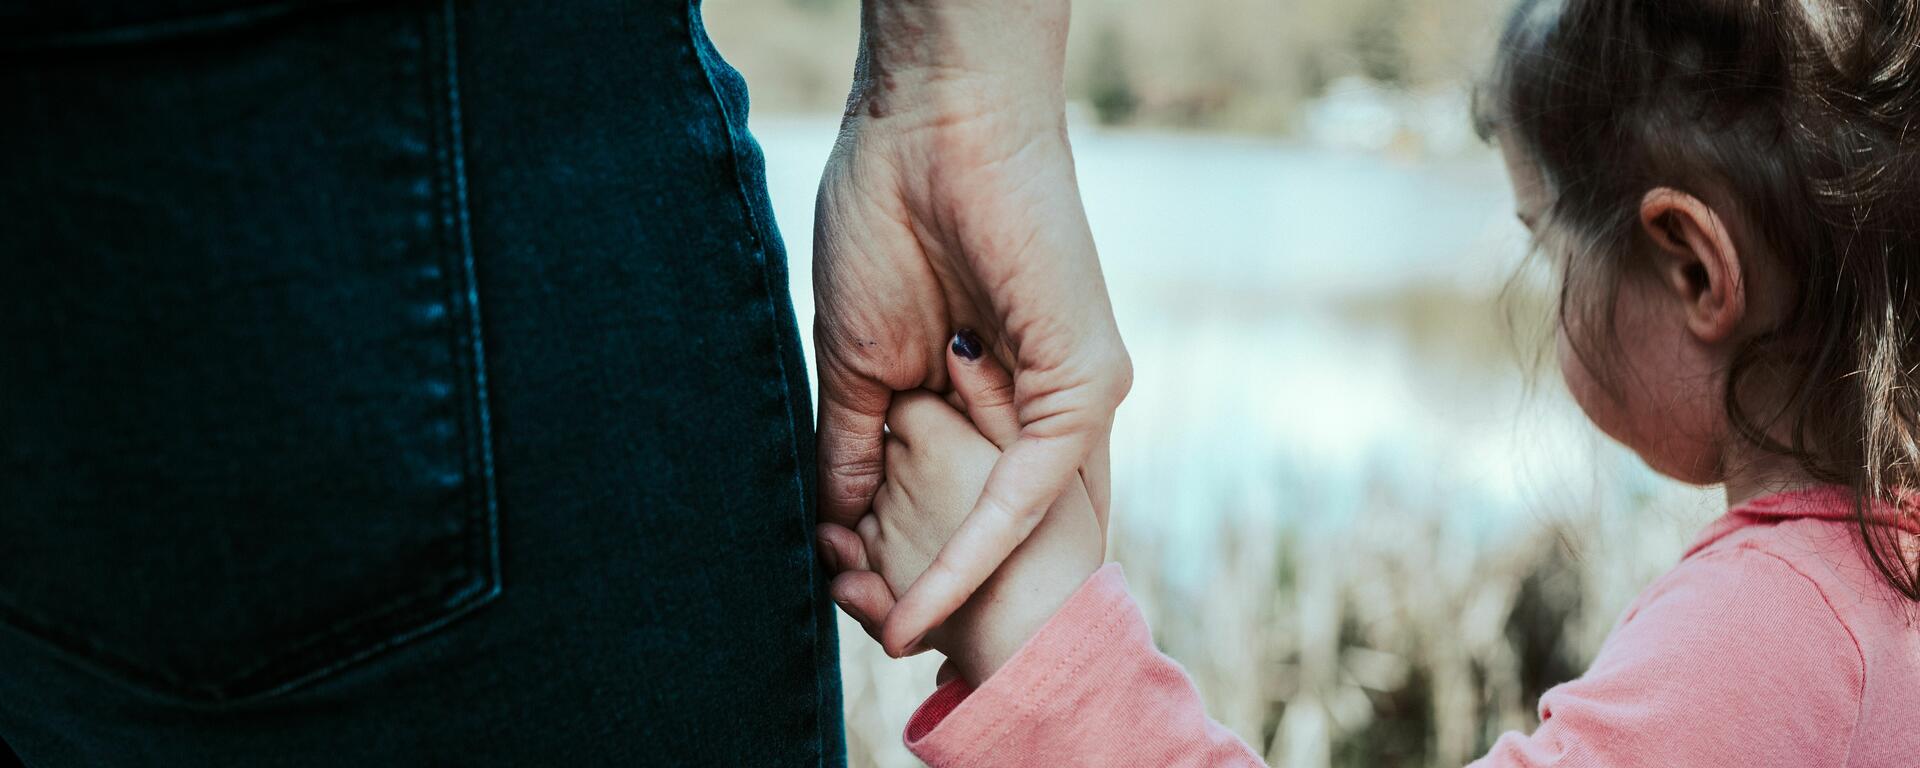 A child in a pink shirt holds the hand of their parent